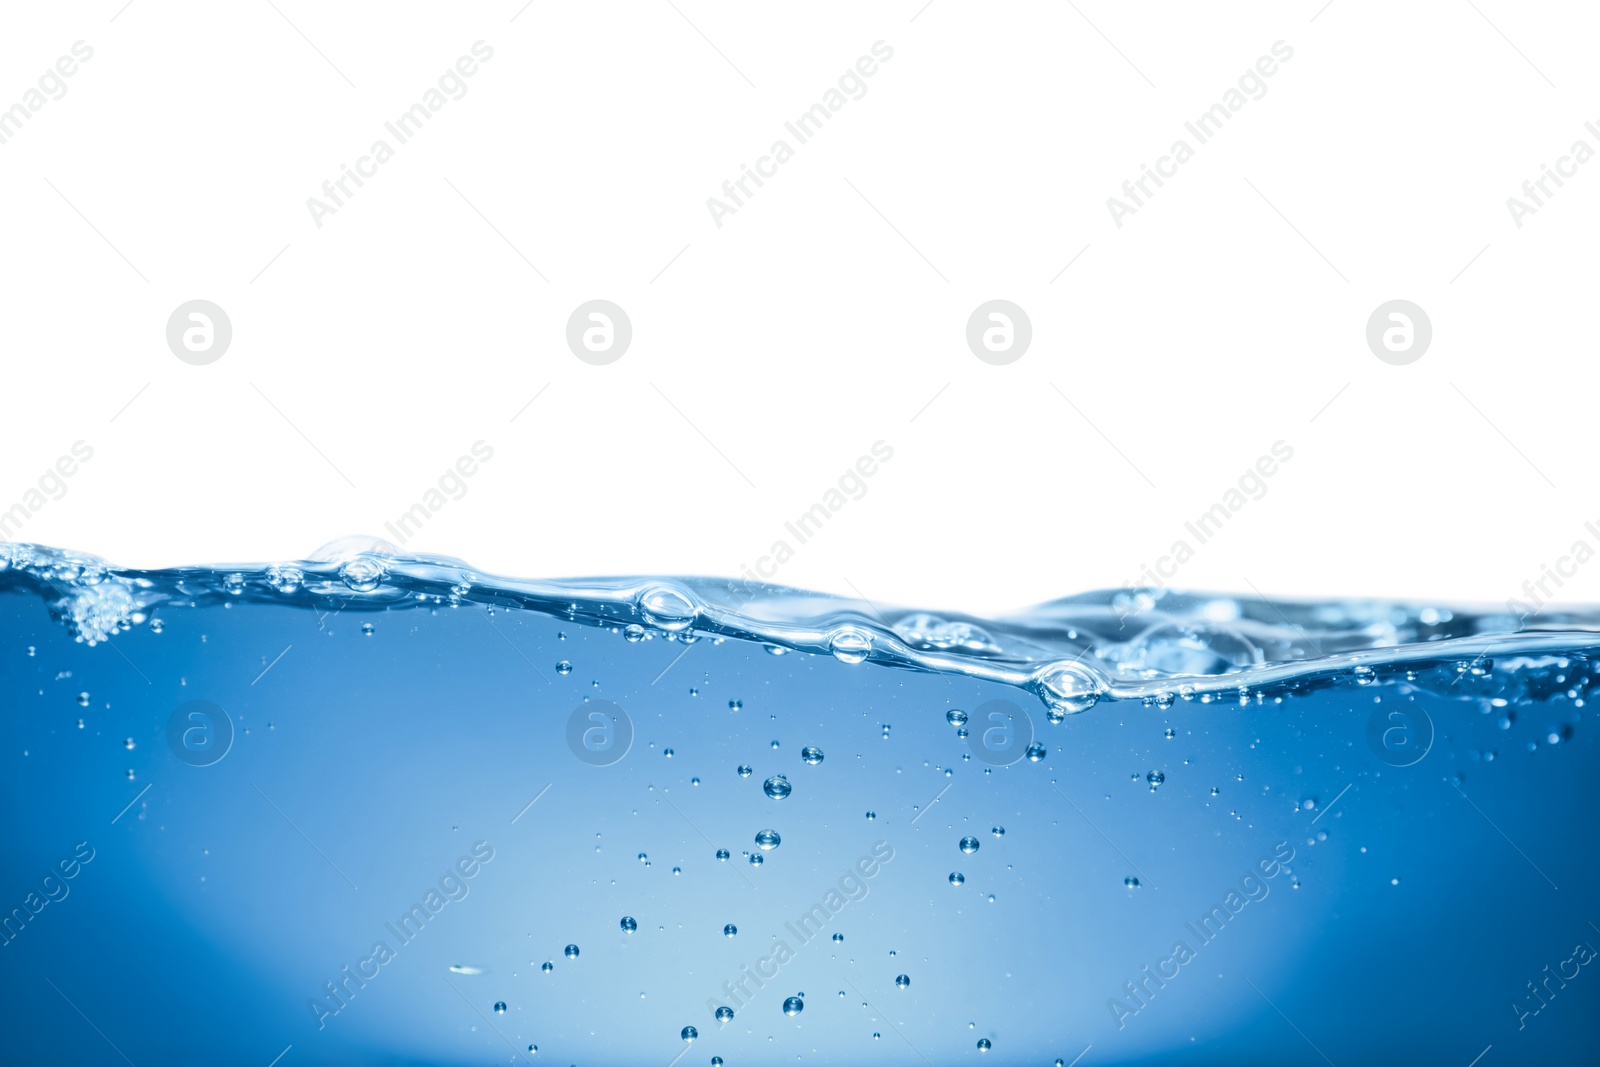 Photo of Bubbles in blue water on white background